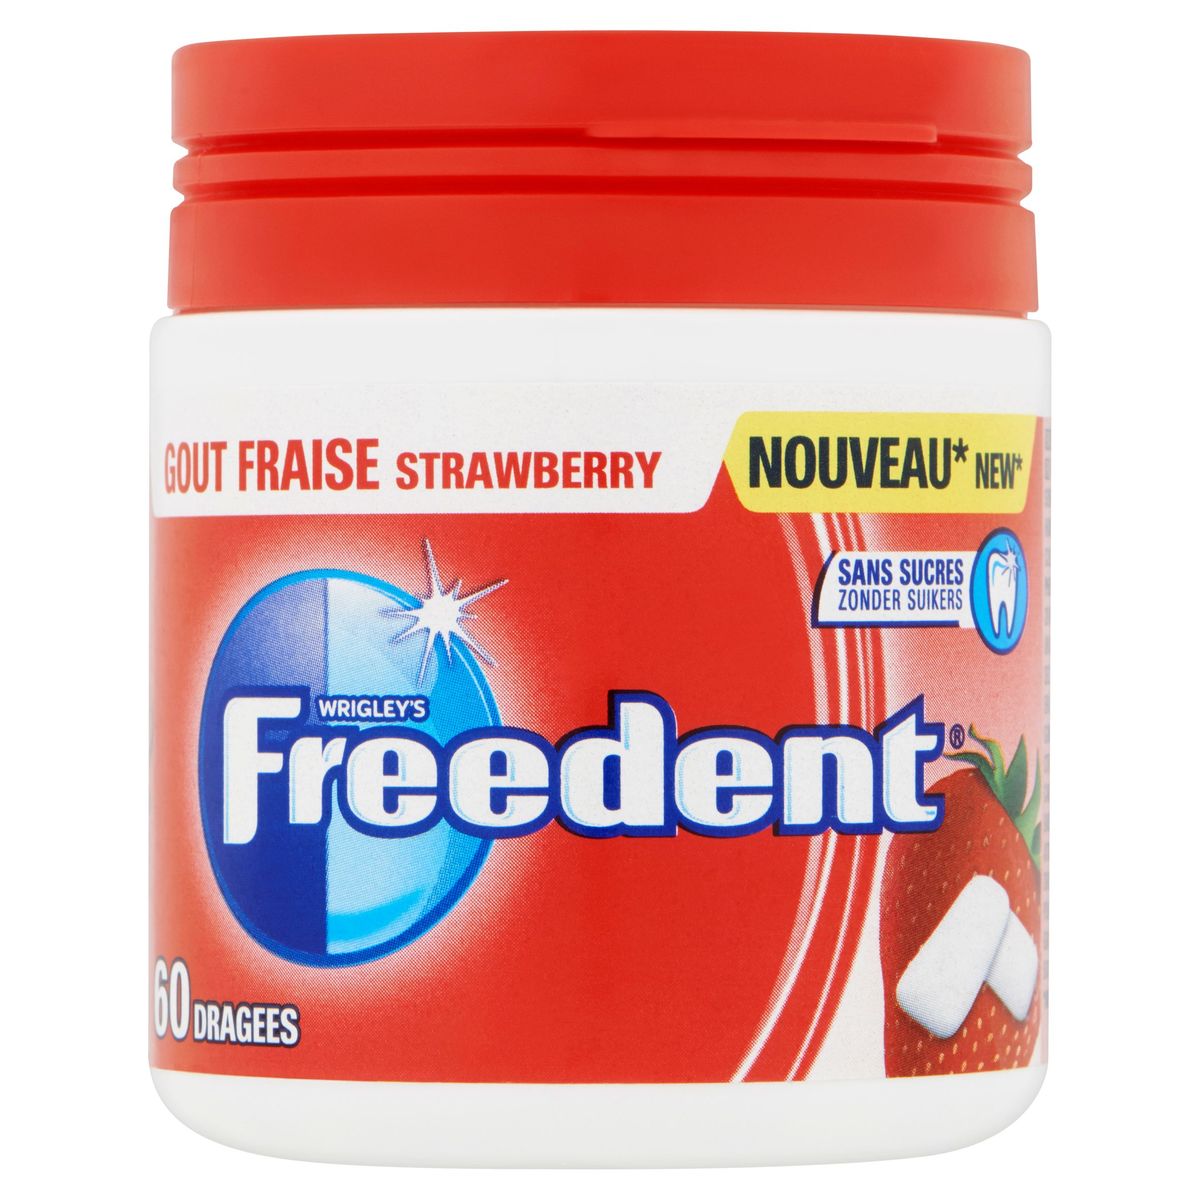 Freedent Strawberry 60 Dragees 84 g